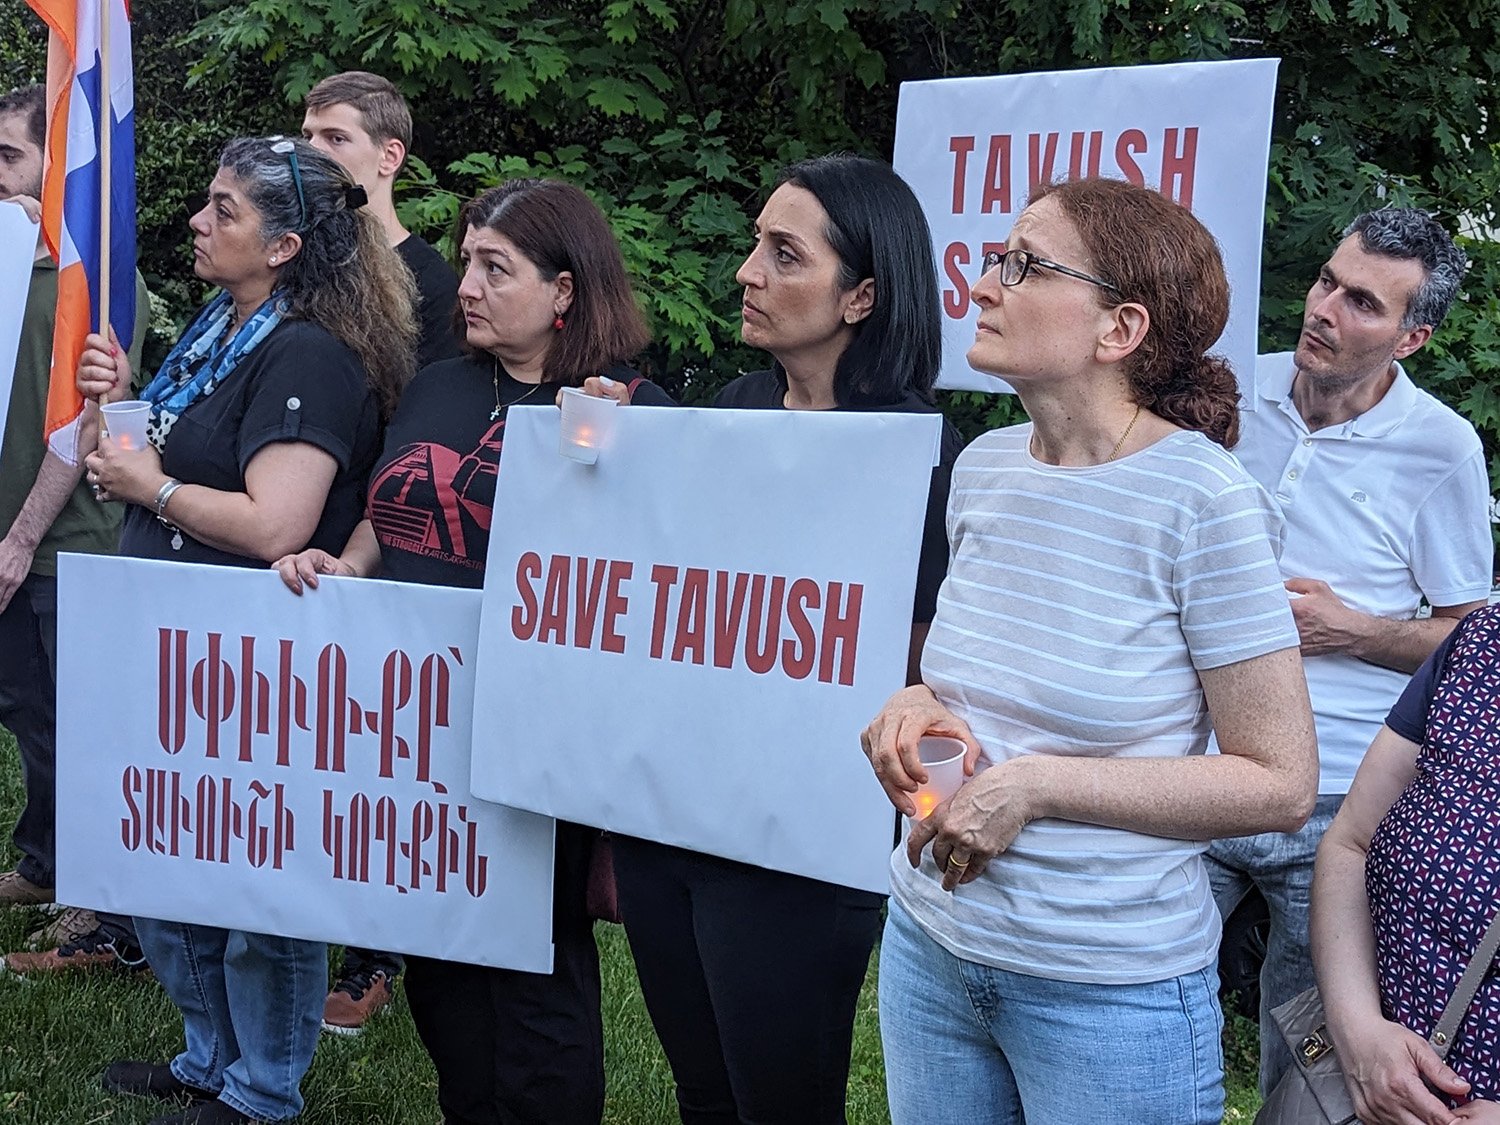 AYF leads Greater Washington, D.C. vigil in solidarity with “Tavush for Homeland” movement